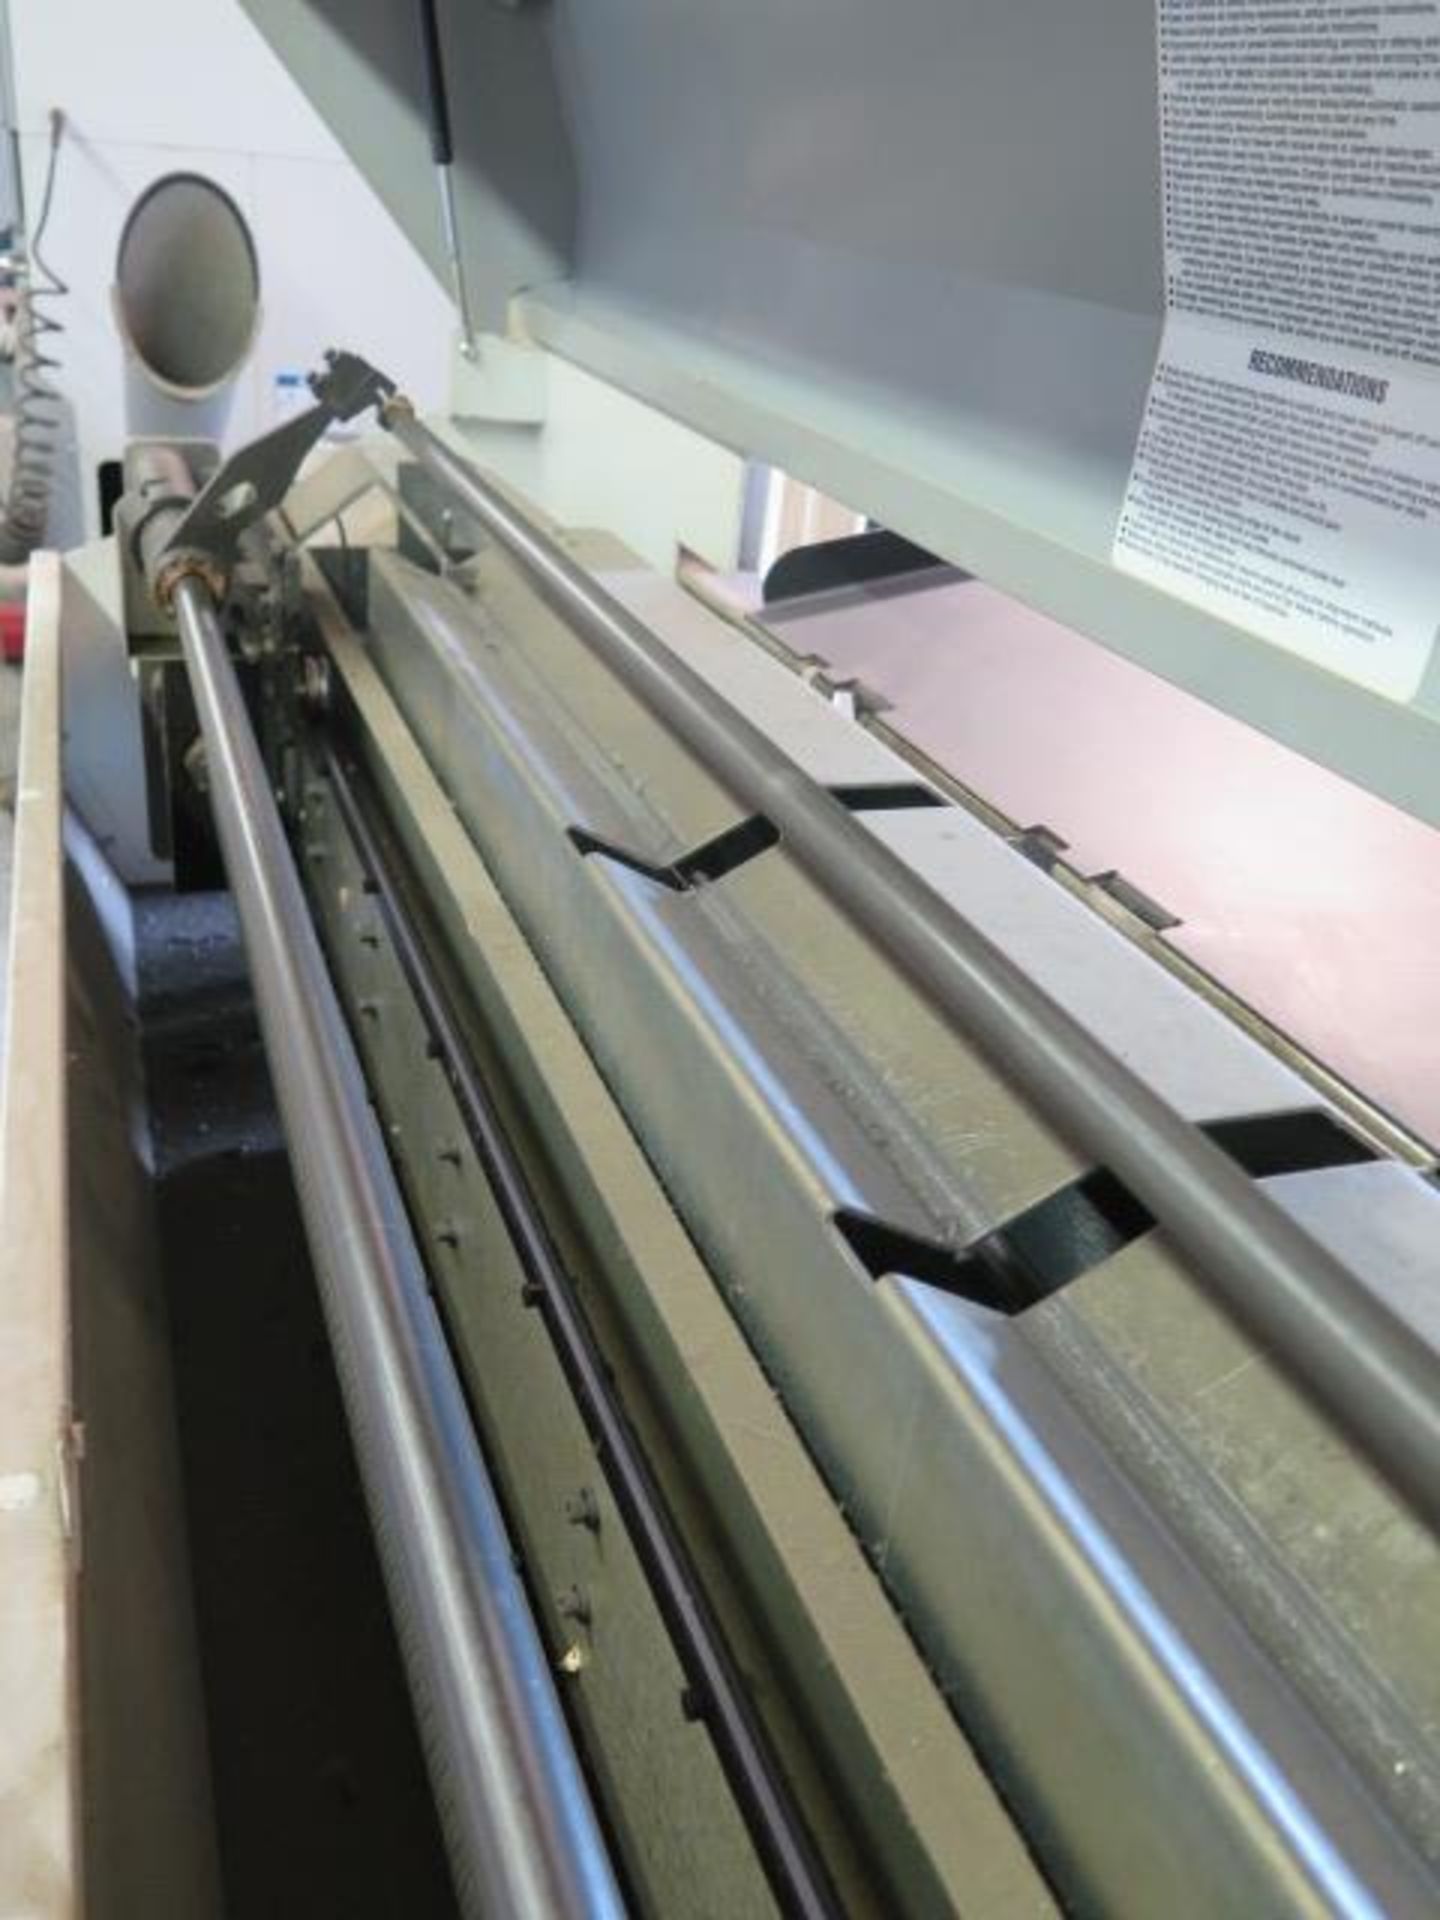 Haas Servobar 300 Automatic Bar Loader / Feeder s/n 92045 w/ Spindle Liner Set (SOLD AS-IS - NO WARR - Image 6 of 11